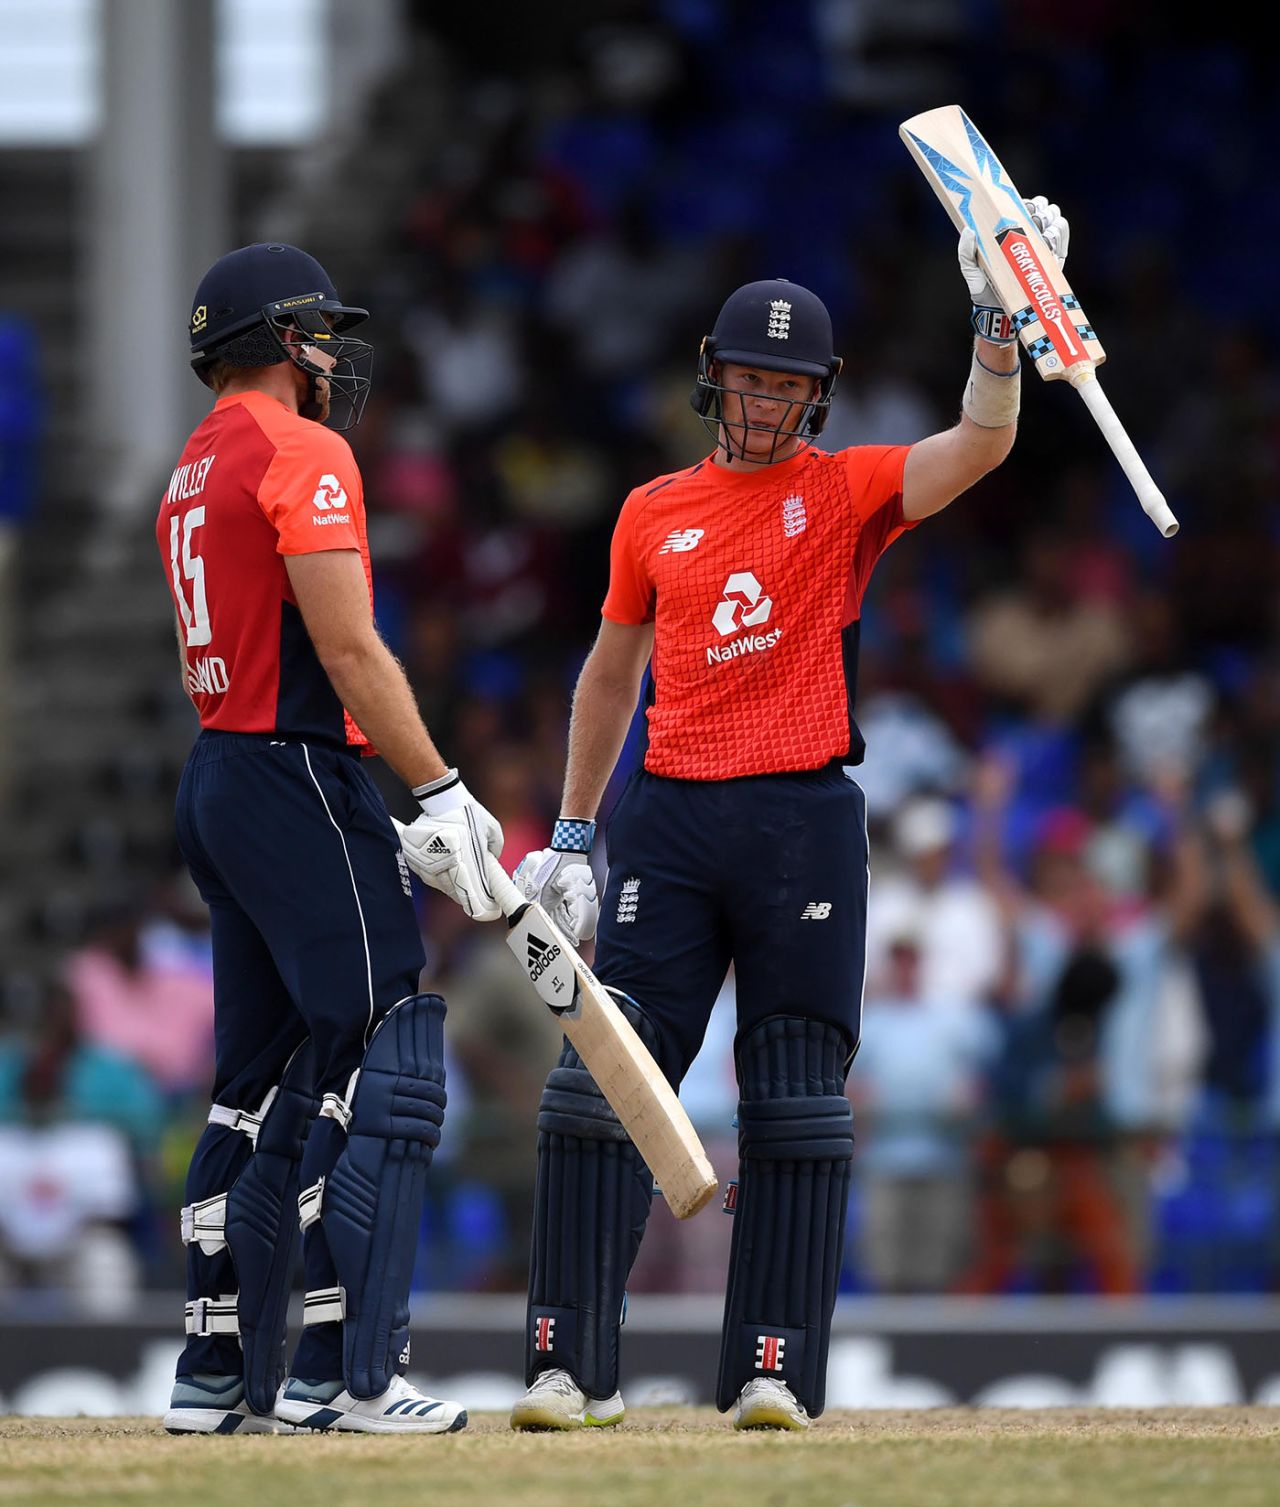 Sam Billings raises his bat on reaching fifty, West Indies v England, 2nd T20I, , St Kitts, March 8, 2019